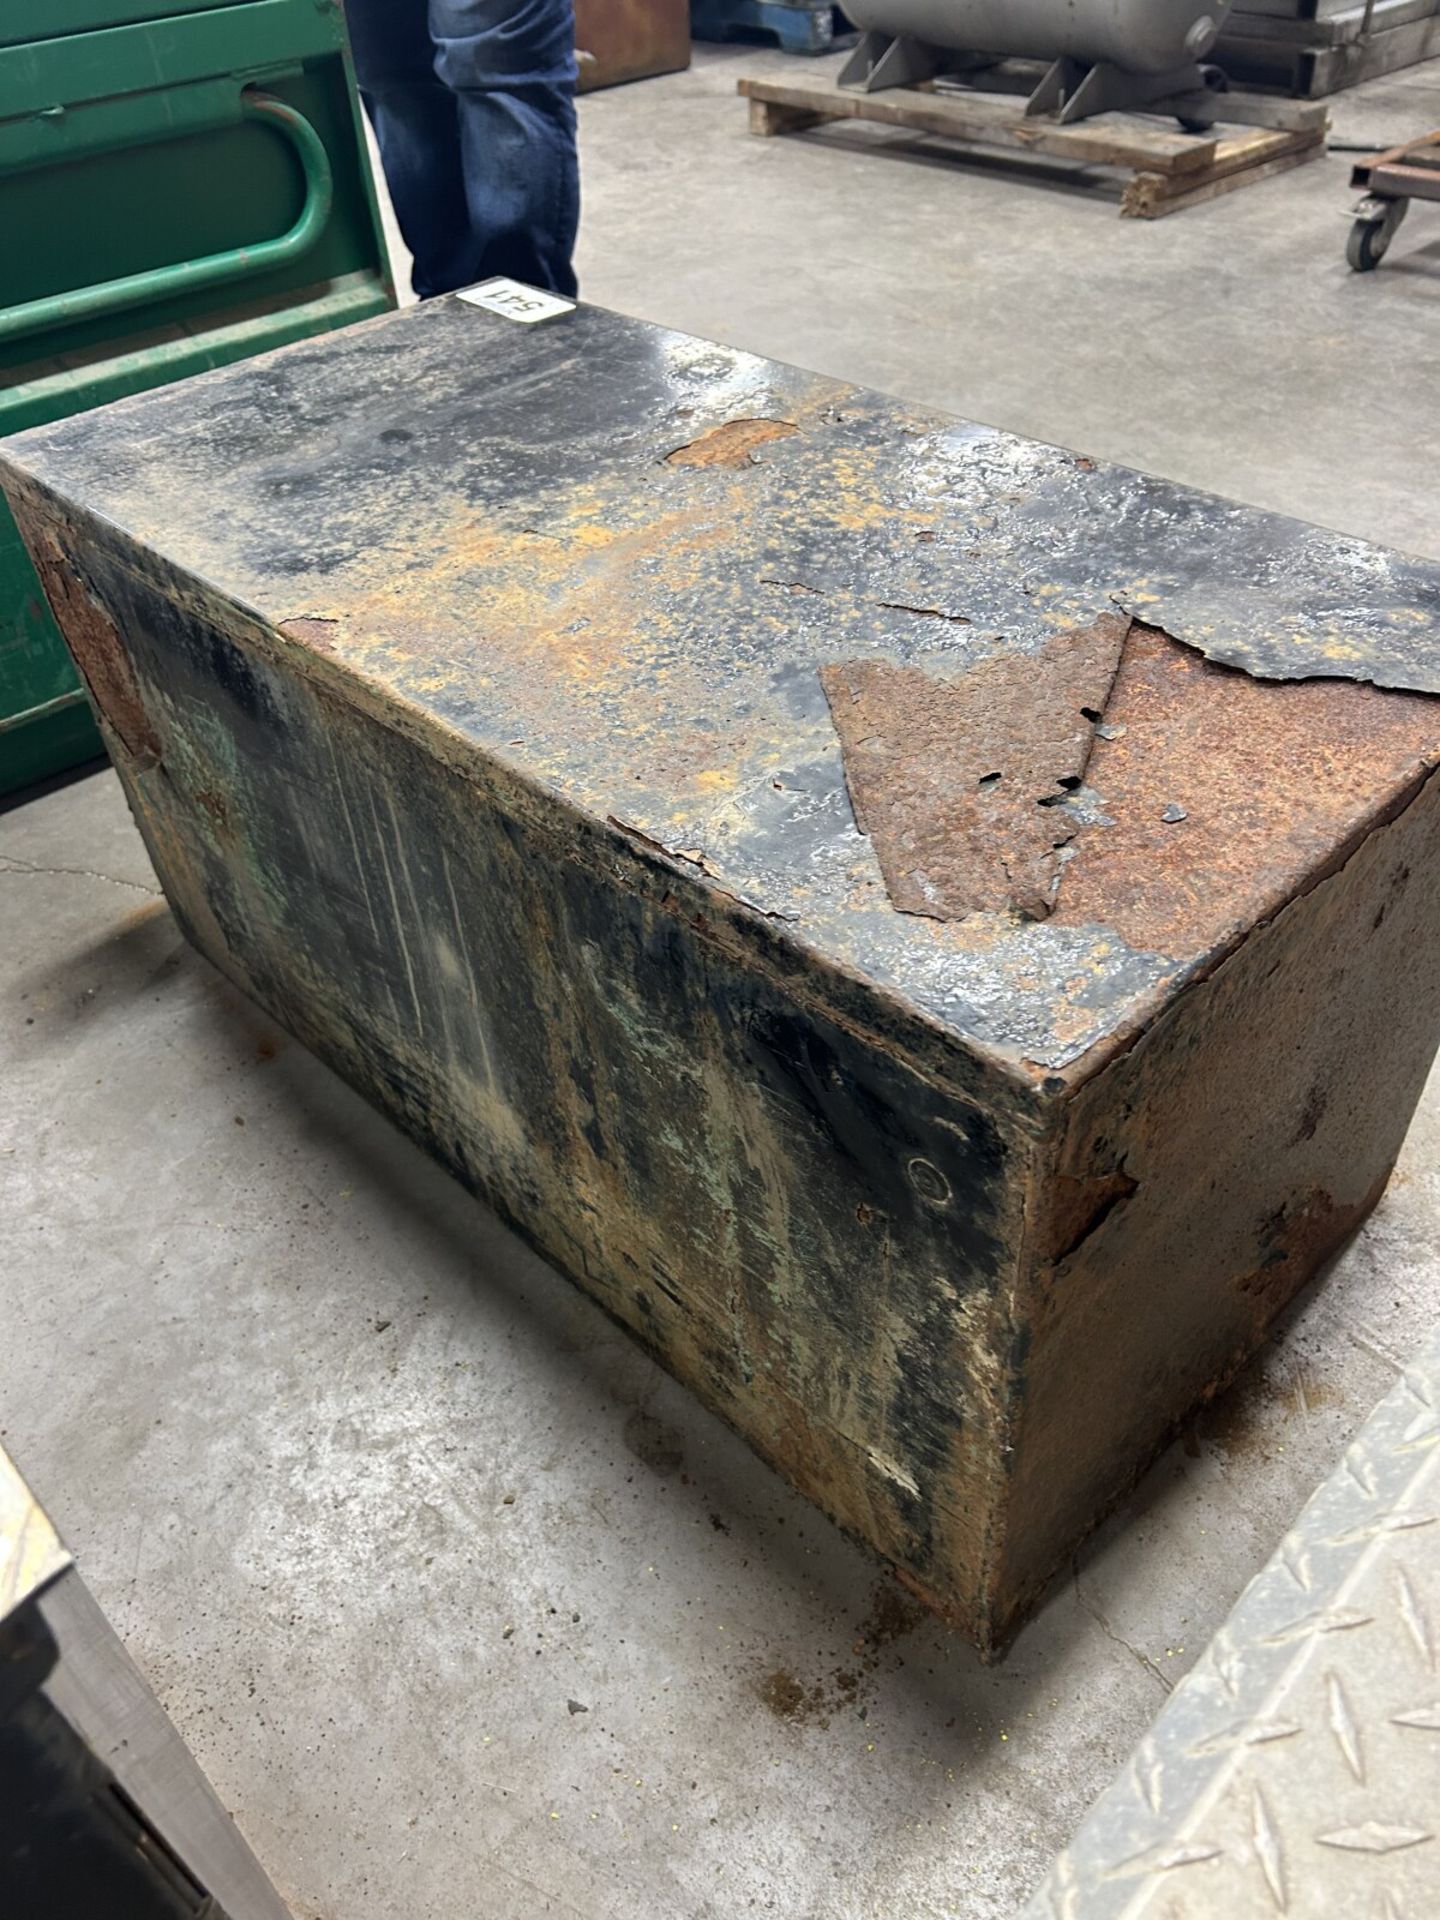 BUYERS HEAVY TRUCK TOOL BOX 36"x18"x18" (LATCH BROKEN, CONTENTS UNKNOWN) - Image 3 of 3